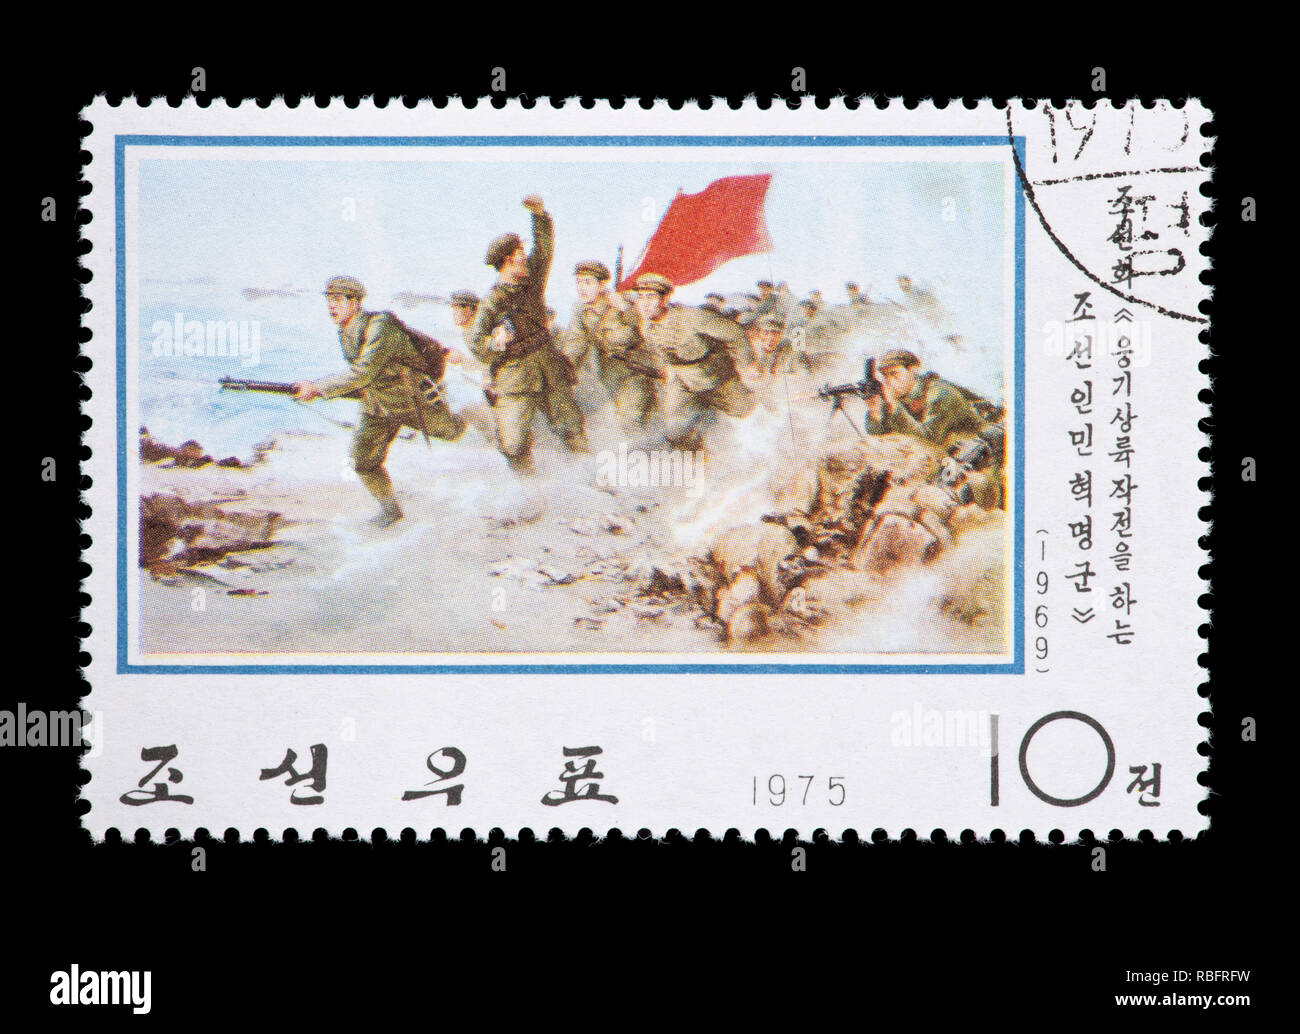 Postage stamp from North Korea (DPRK) depicting the painting Guerrilla Army Landing at Unggi, Stock Photo